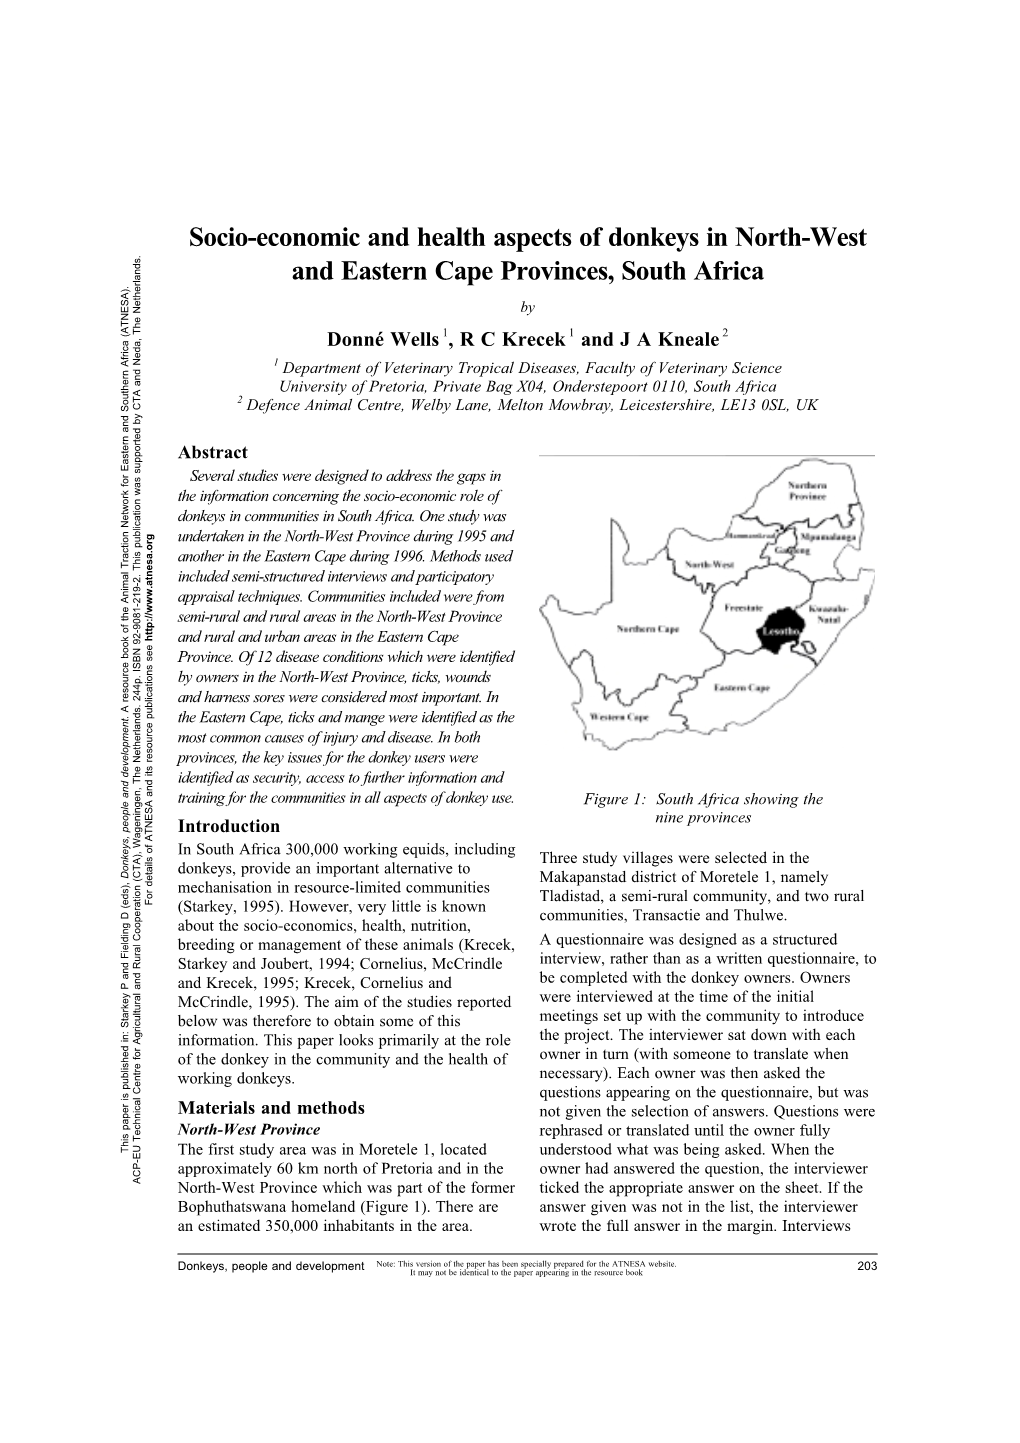 Socio-Economic and Health Aspects of Donkeys in North-West and Eastern